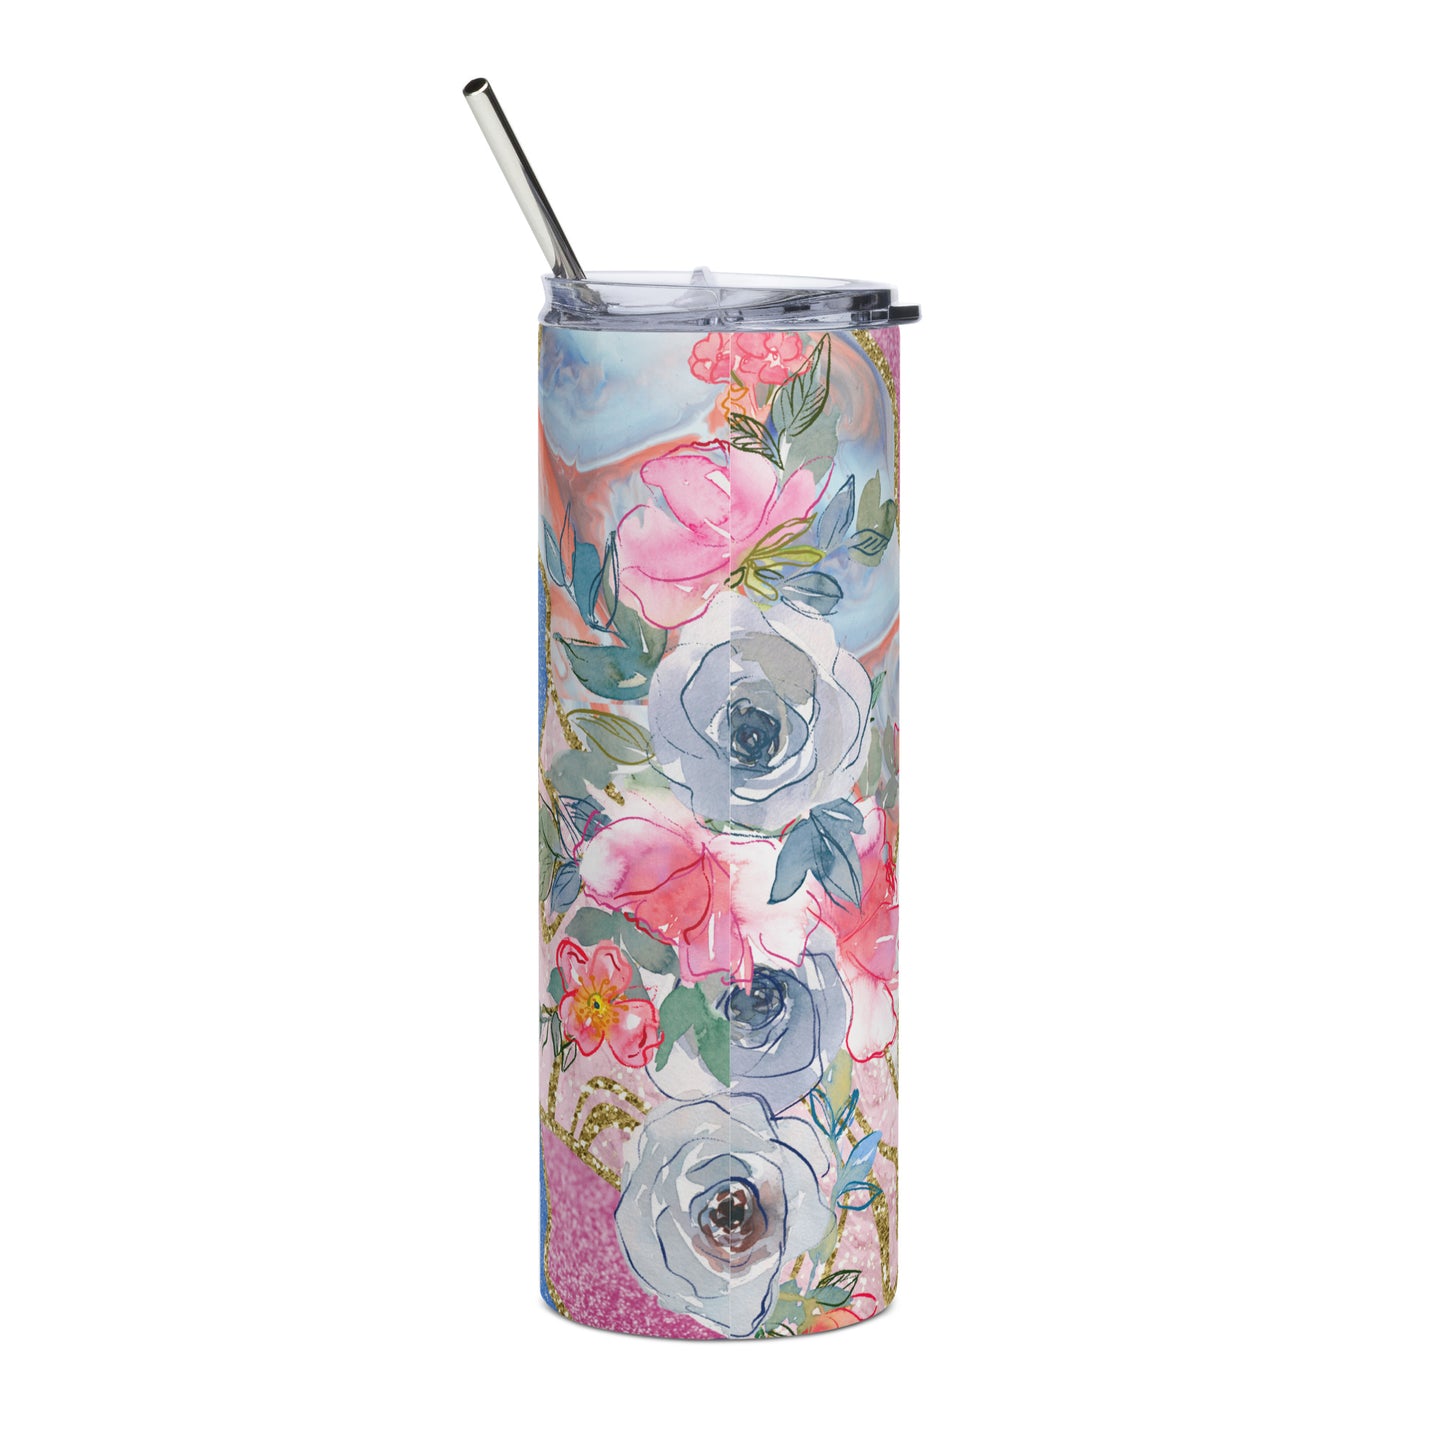 This 20 oz tumbler showcases an empowering back design, complementing the theme of prayer and reduced worry.